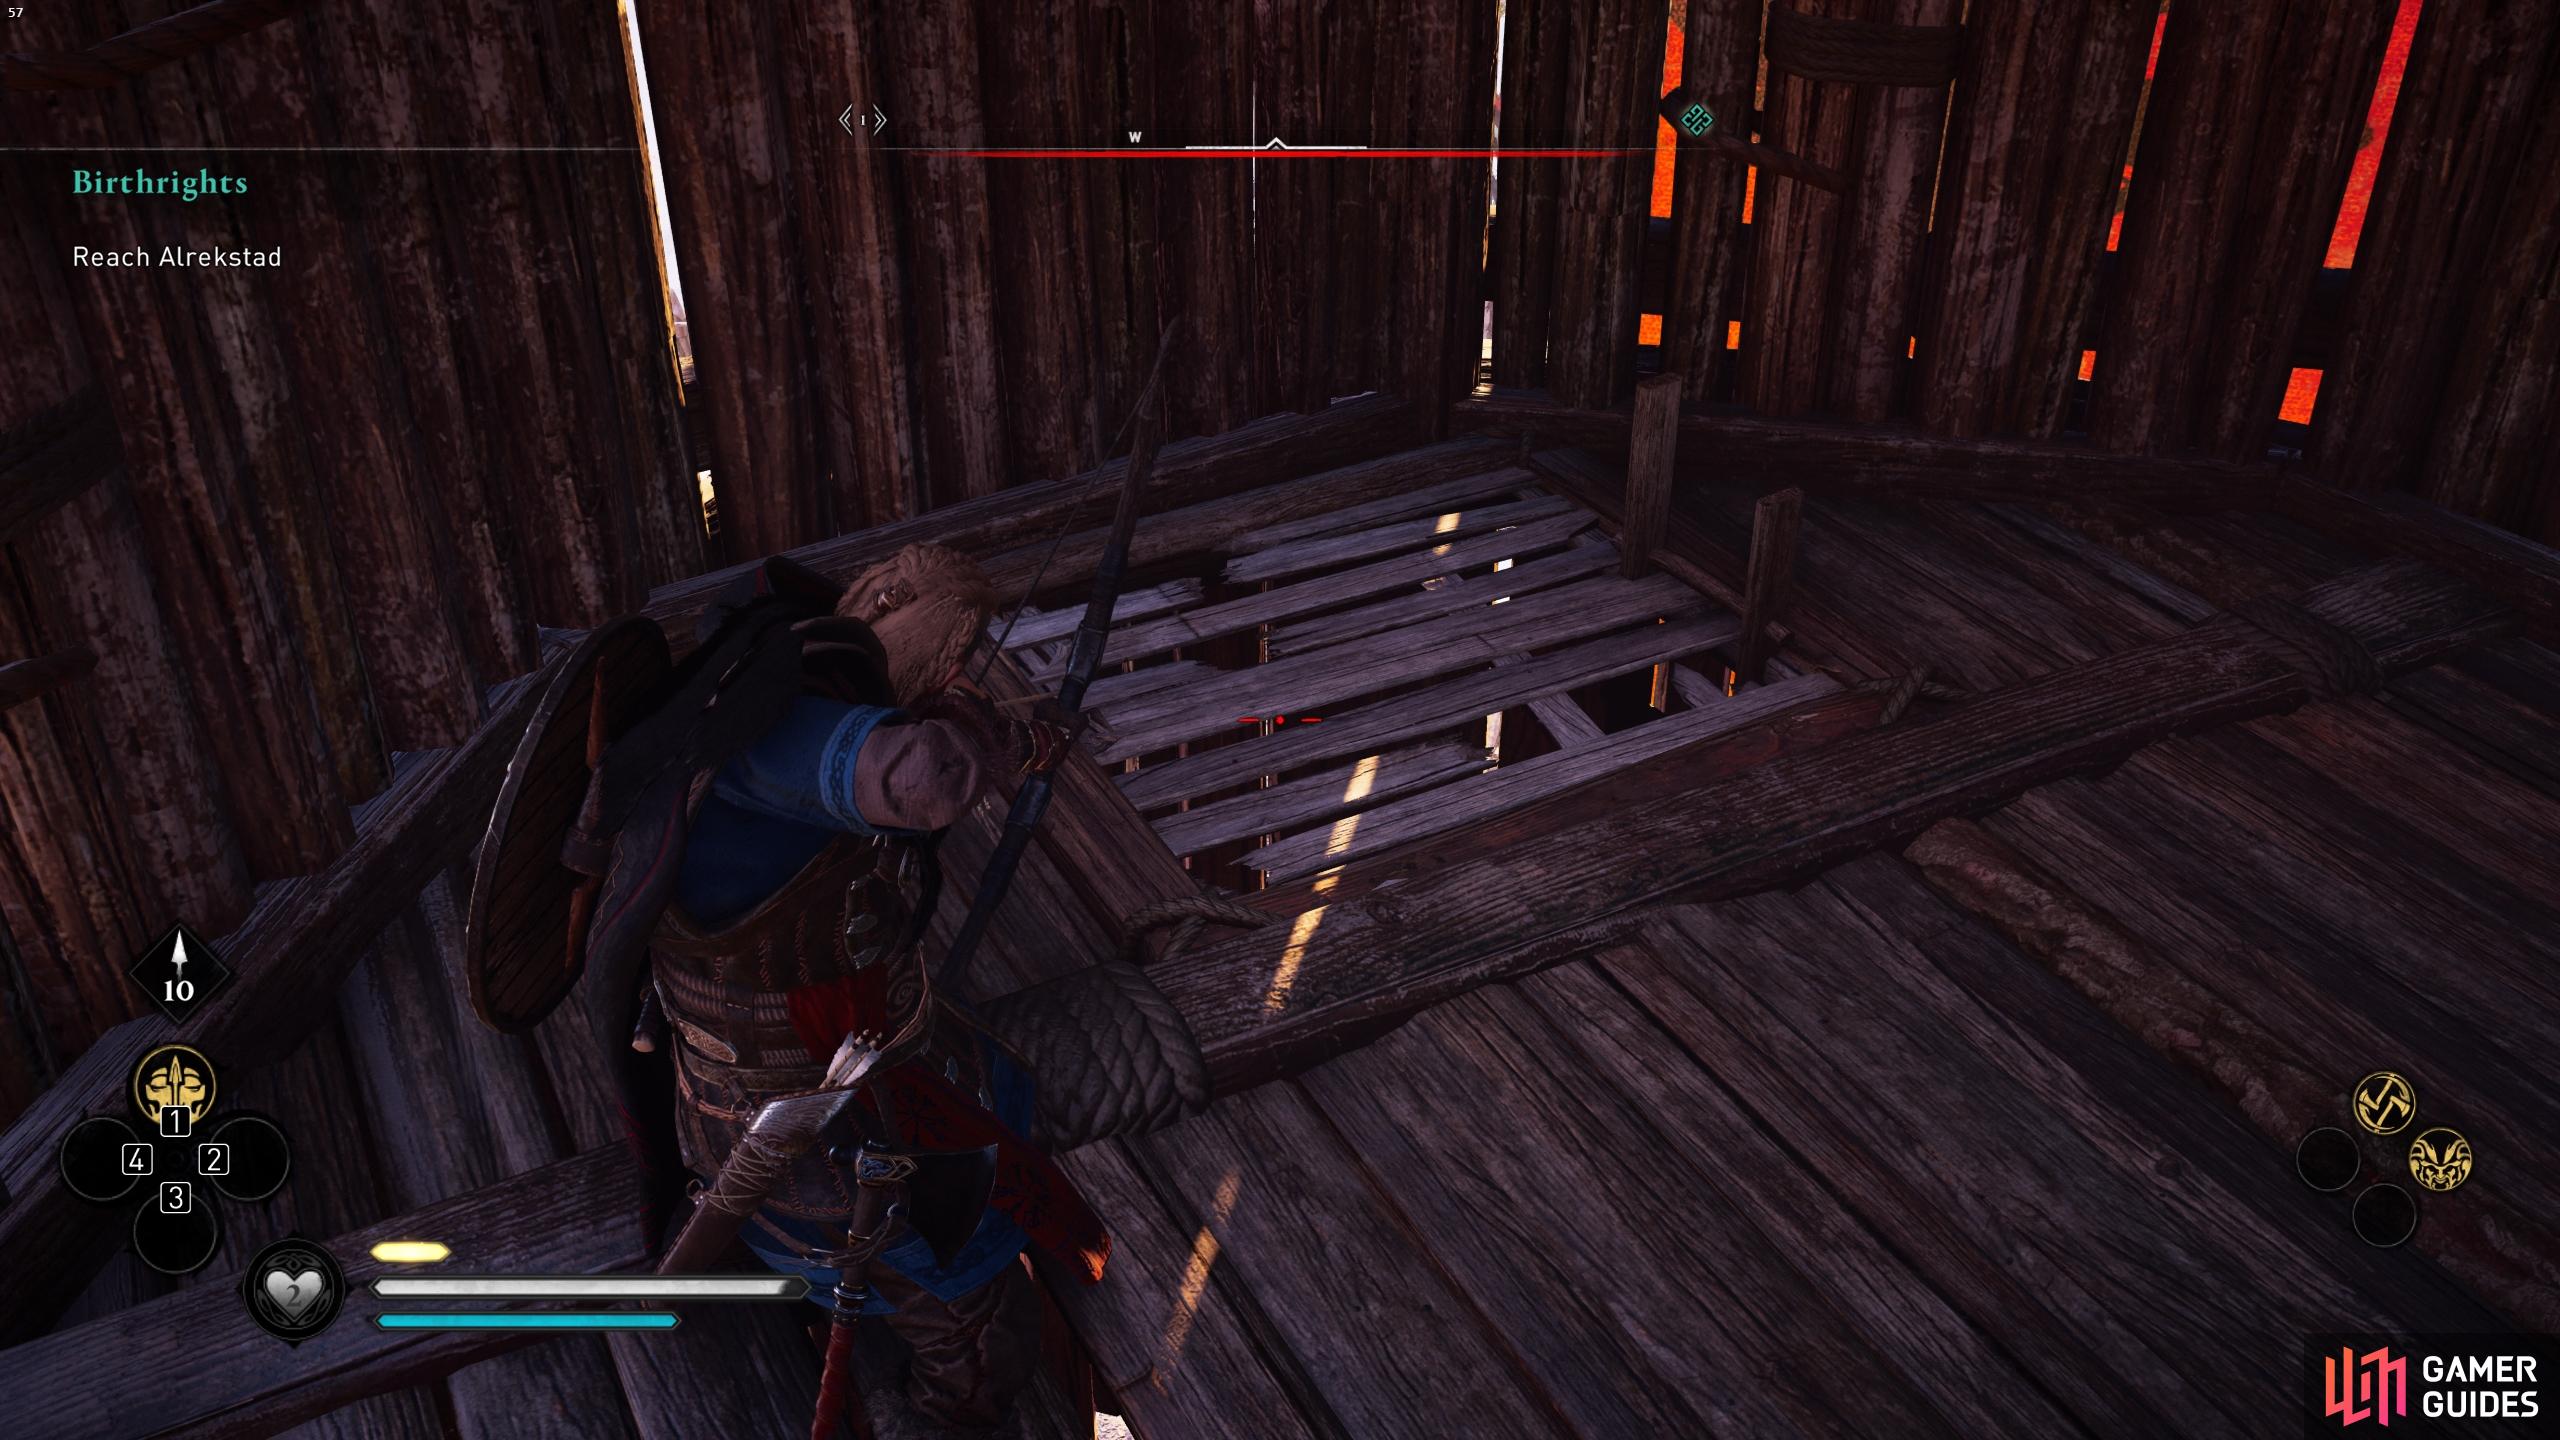 You can shoot the wooden platform within the tower to gain access to the Book of Knowledge.